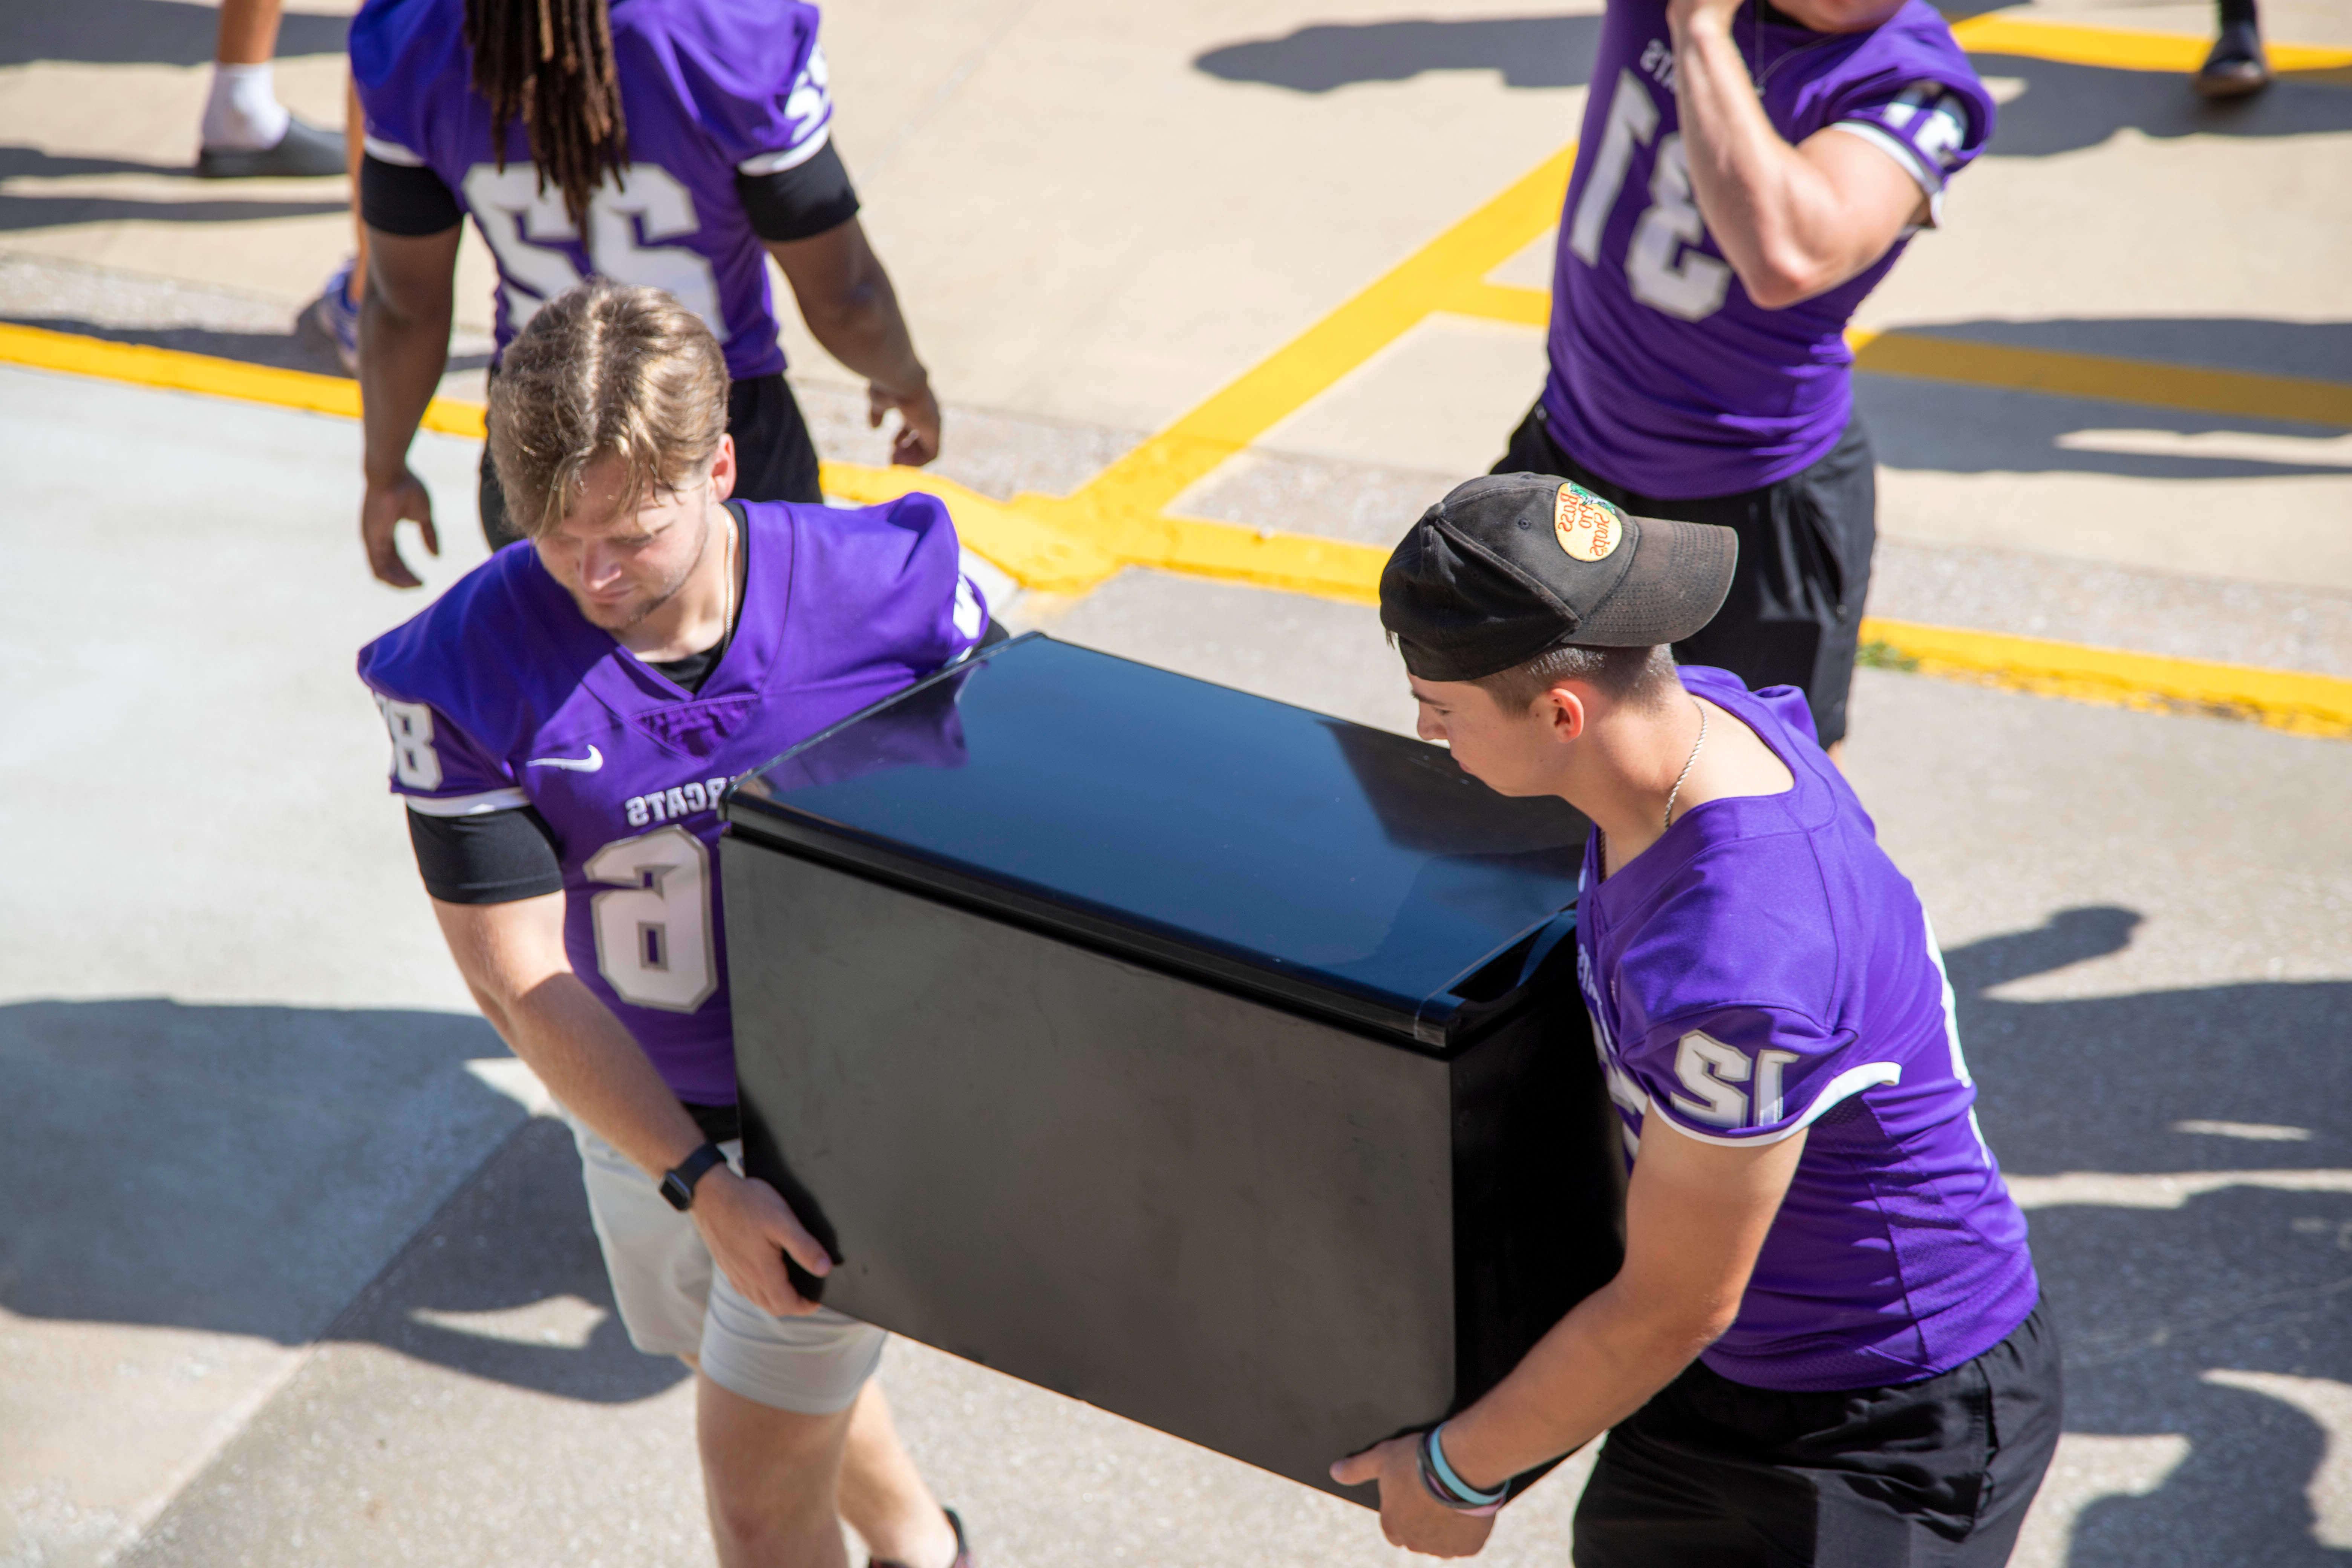 football players help carry furniture into dorm